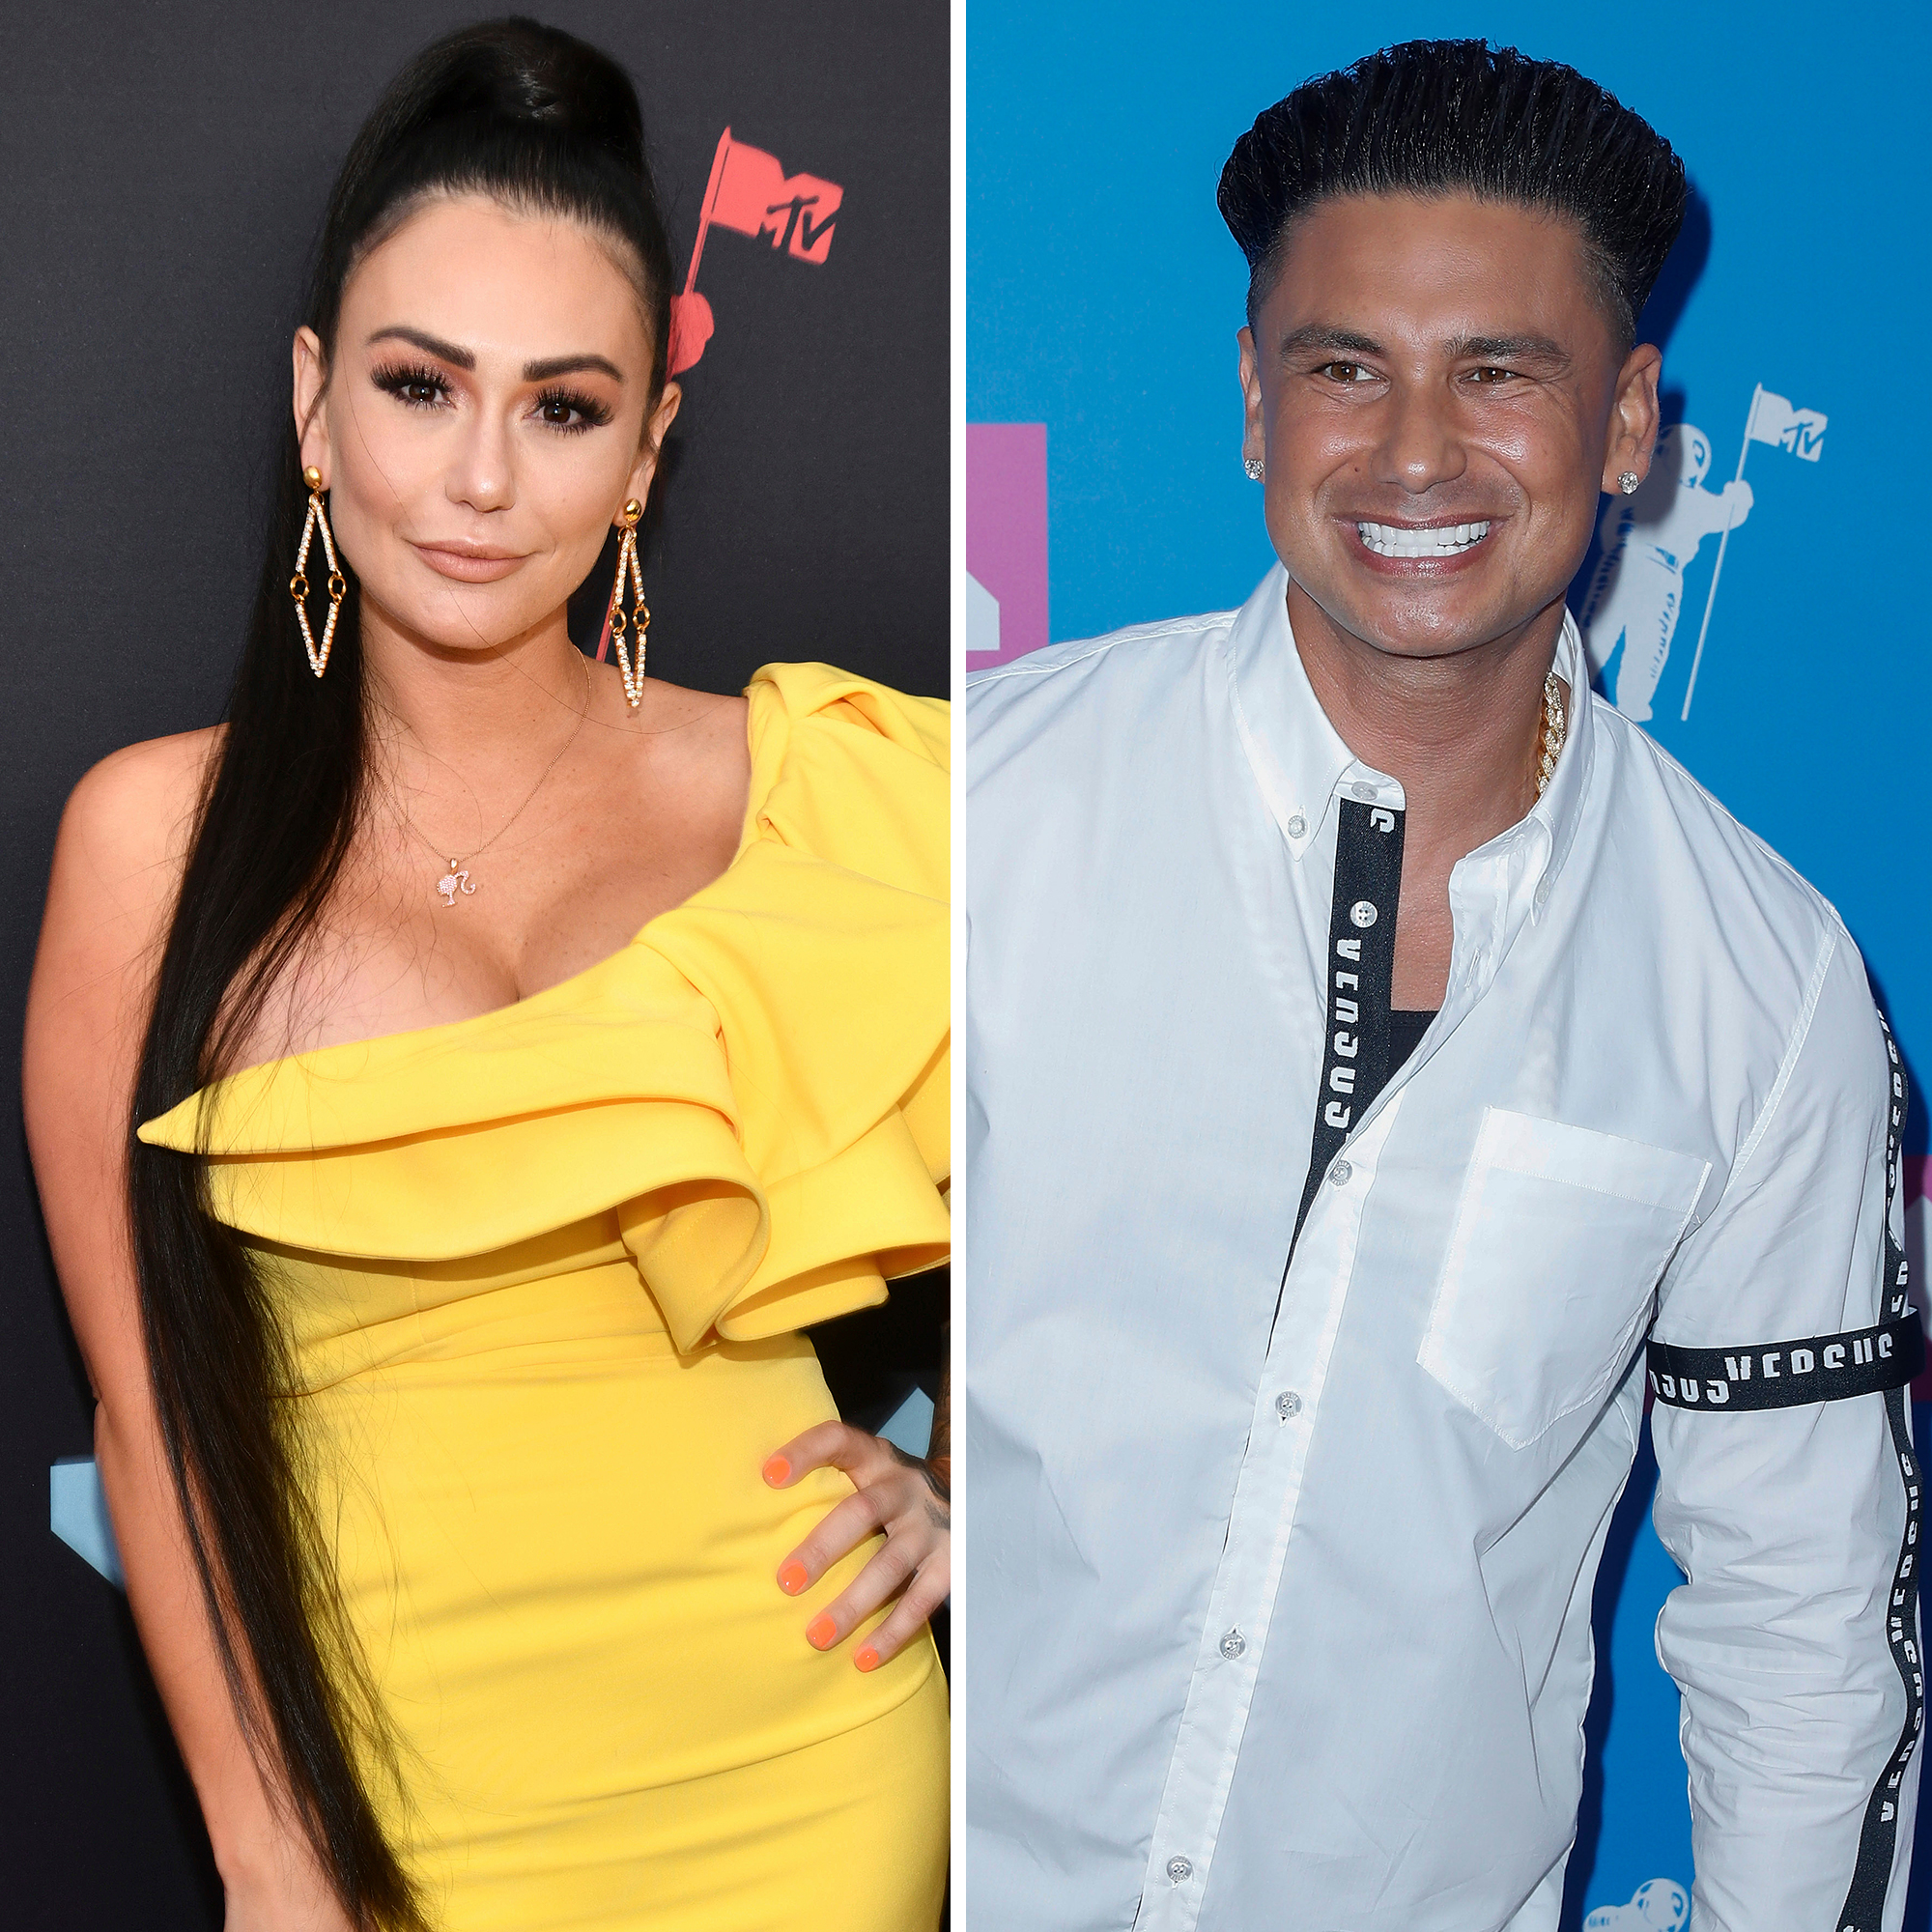 Jersey Shore's Pauly D, Snooki And JWOWW To Get Spinoff Shows